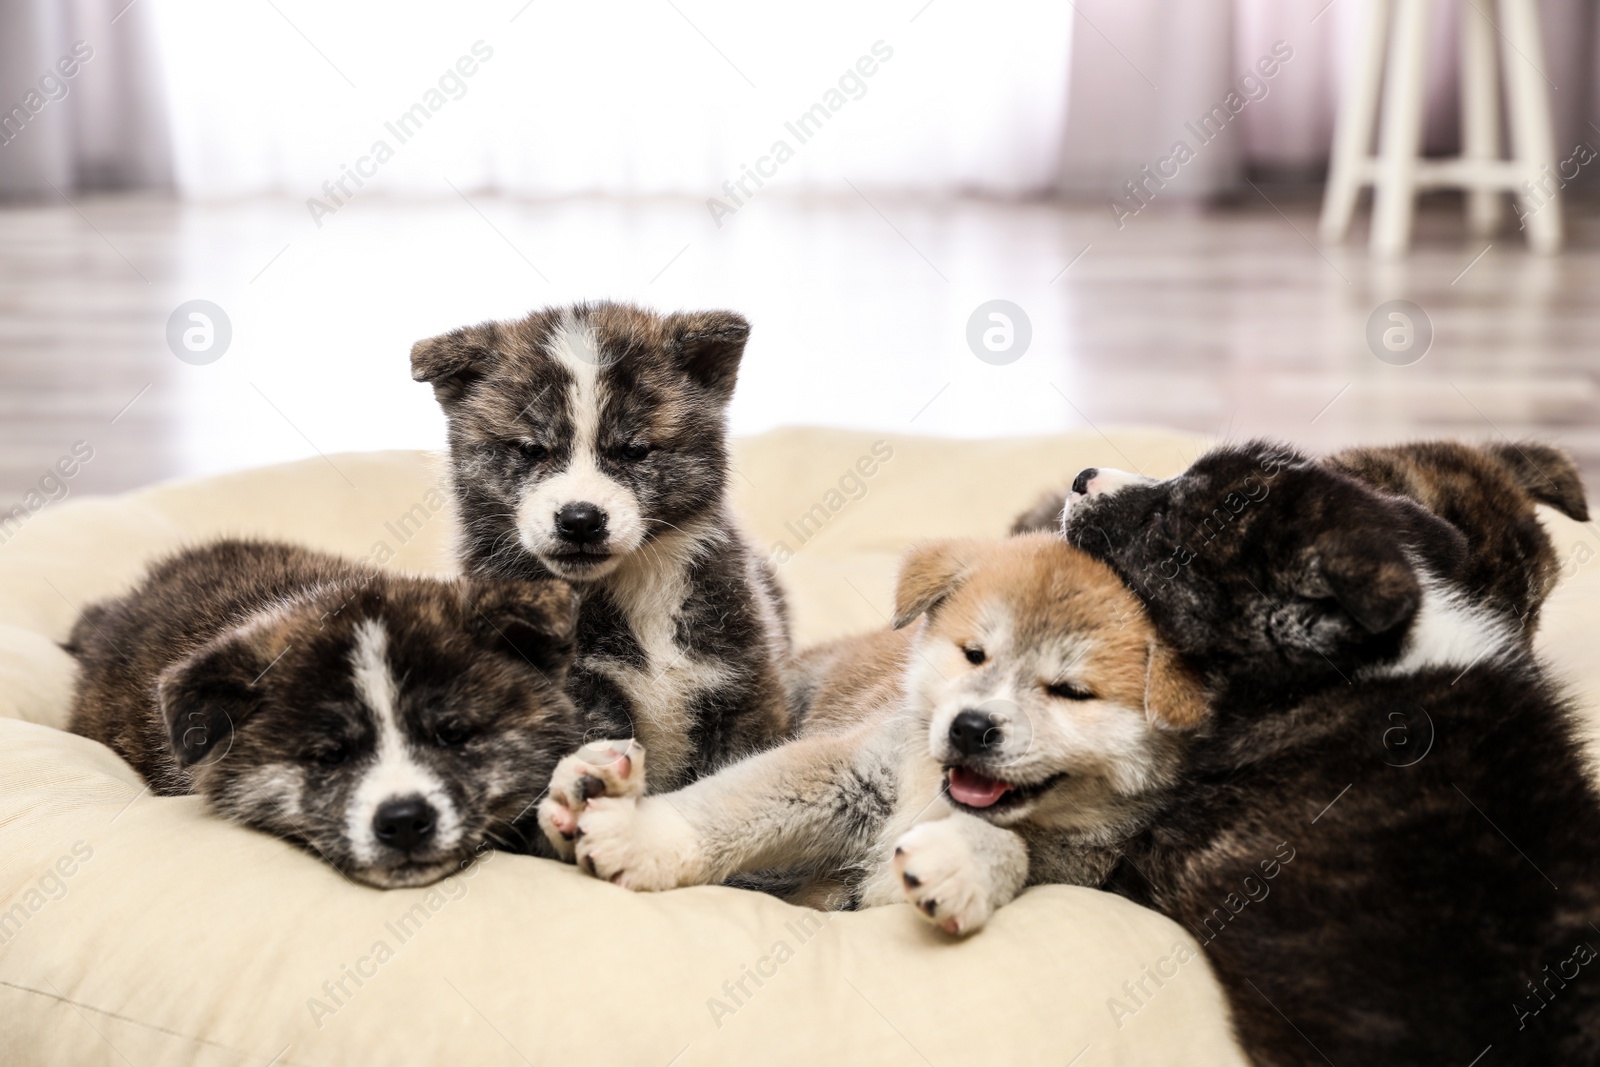 Photo of Akita inu puppies on pet pillow. Cute dogs